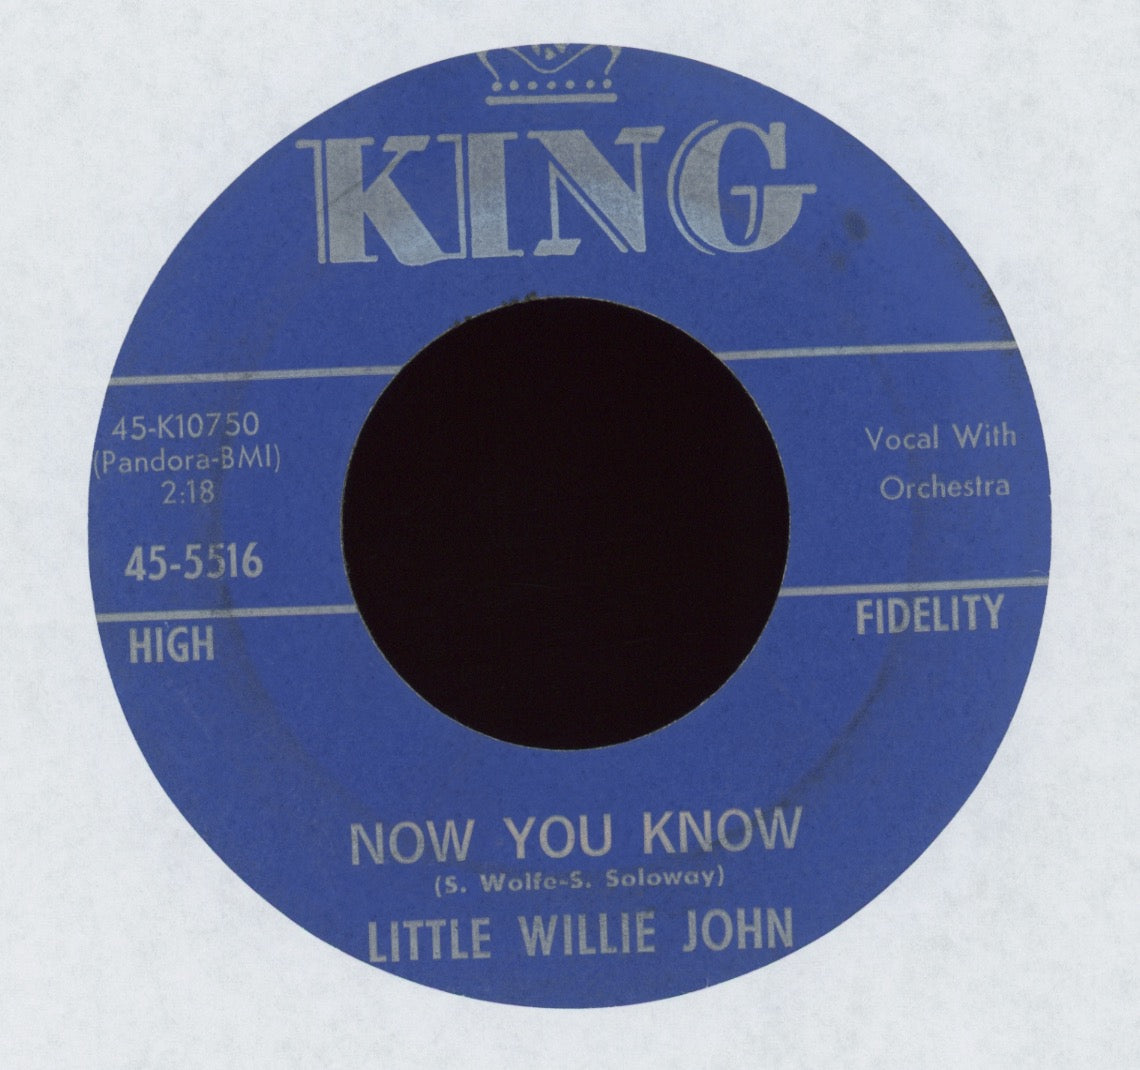 Little Willie John - Take My Love (I Want To Give It All To You) on King